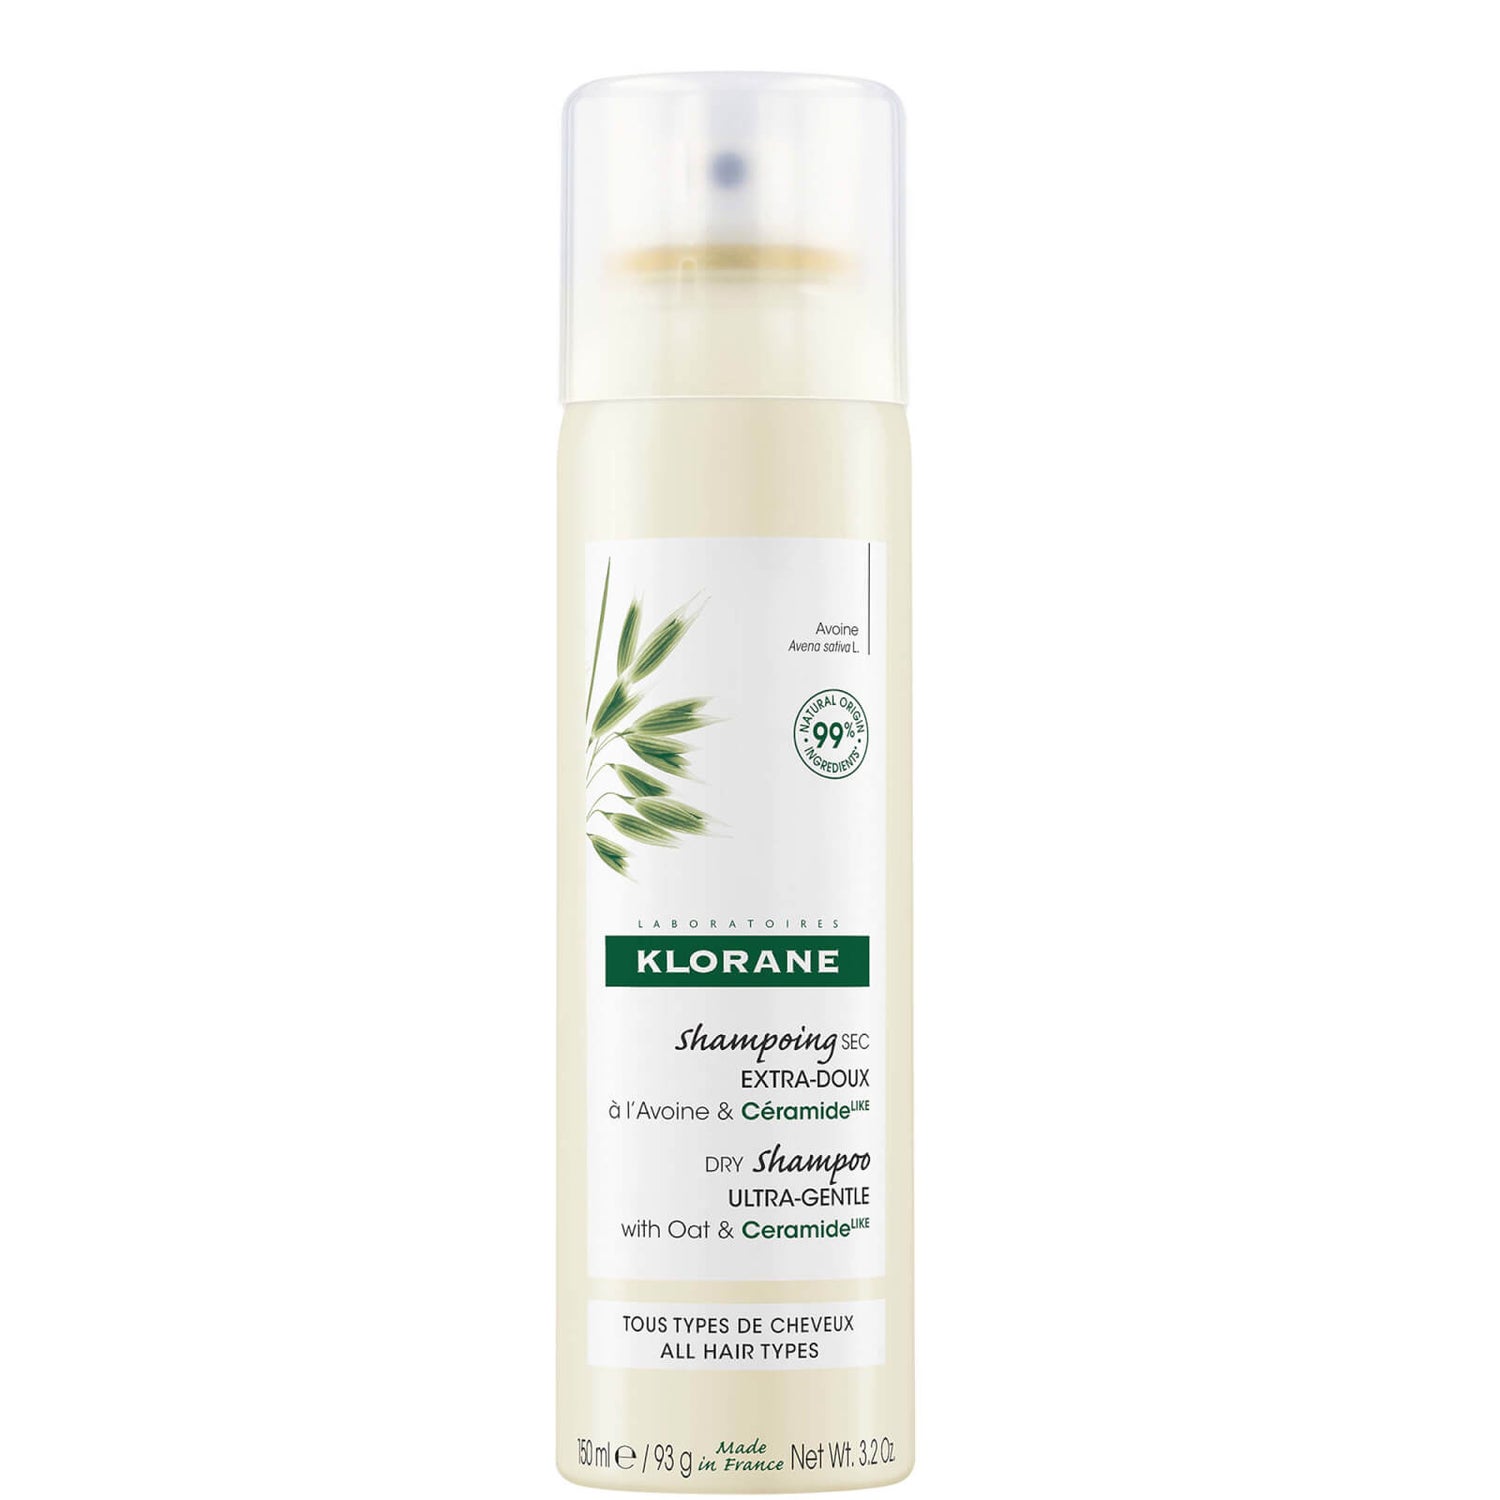 KLORANE Extra-Gentle Dry Shampoo for All Hair Types with Oat and Ceramide LIKE 150ml